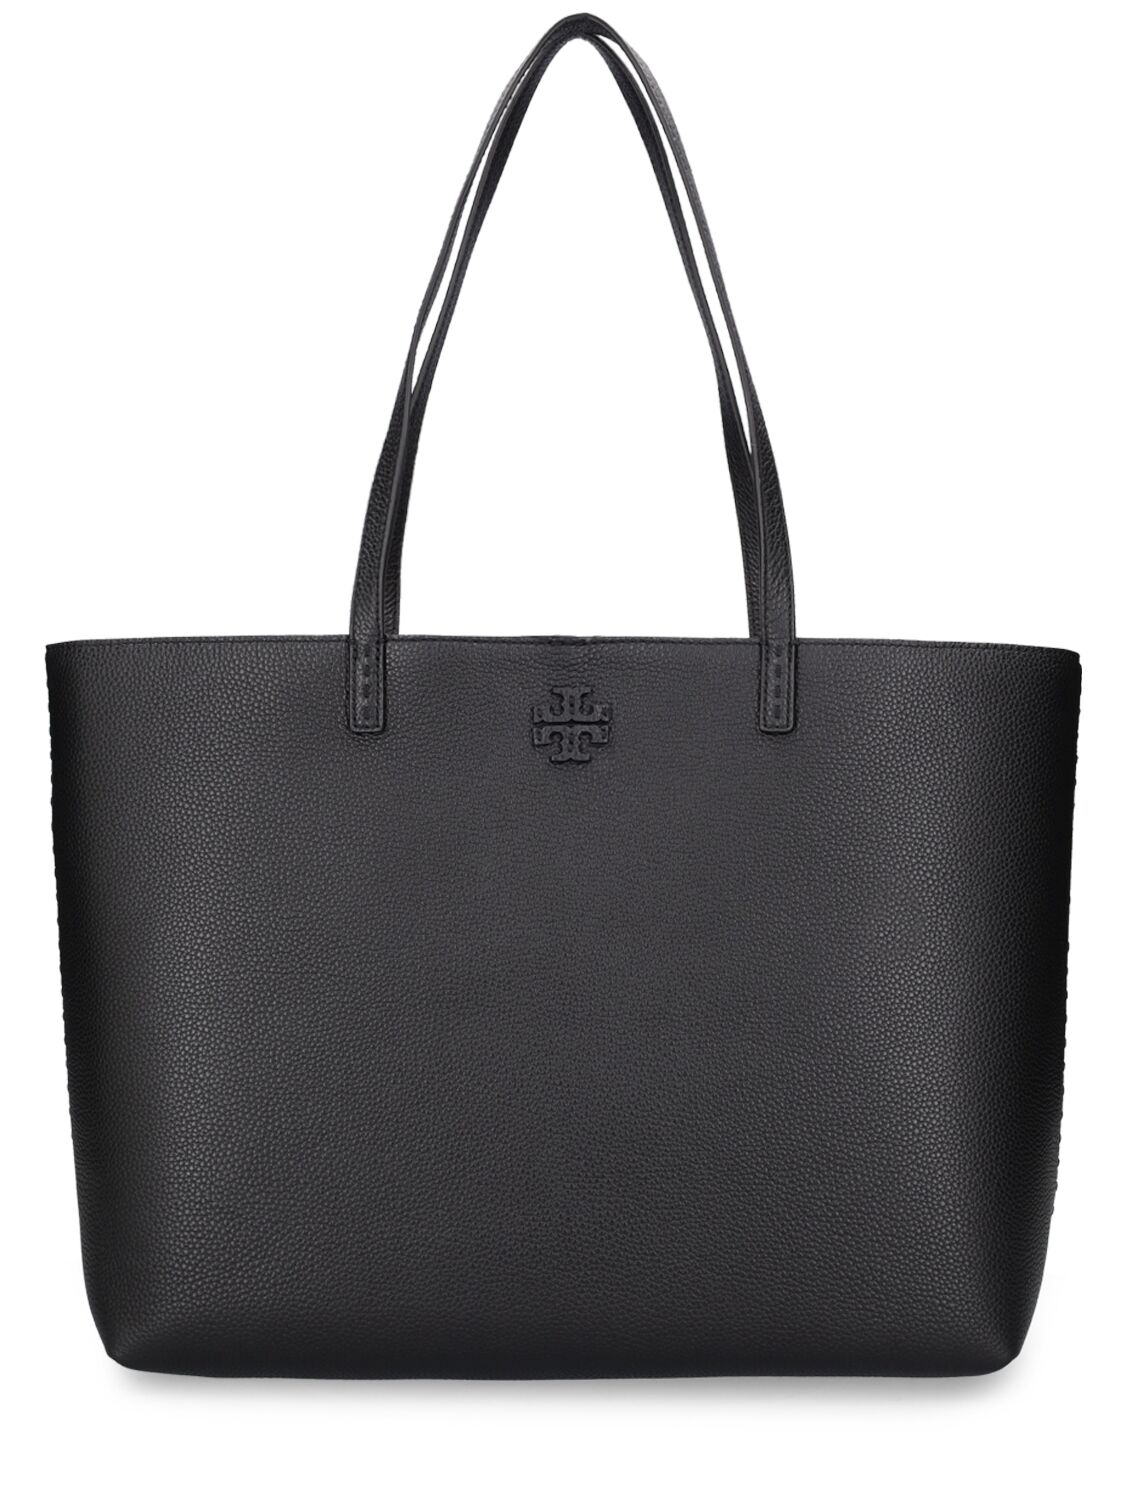 Image of Mcgraw Leather Tote Bag